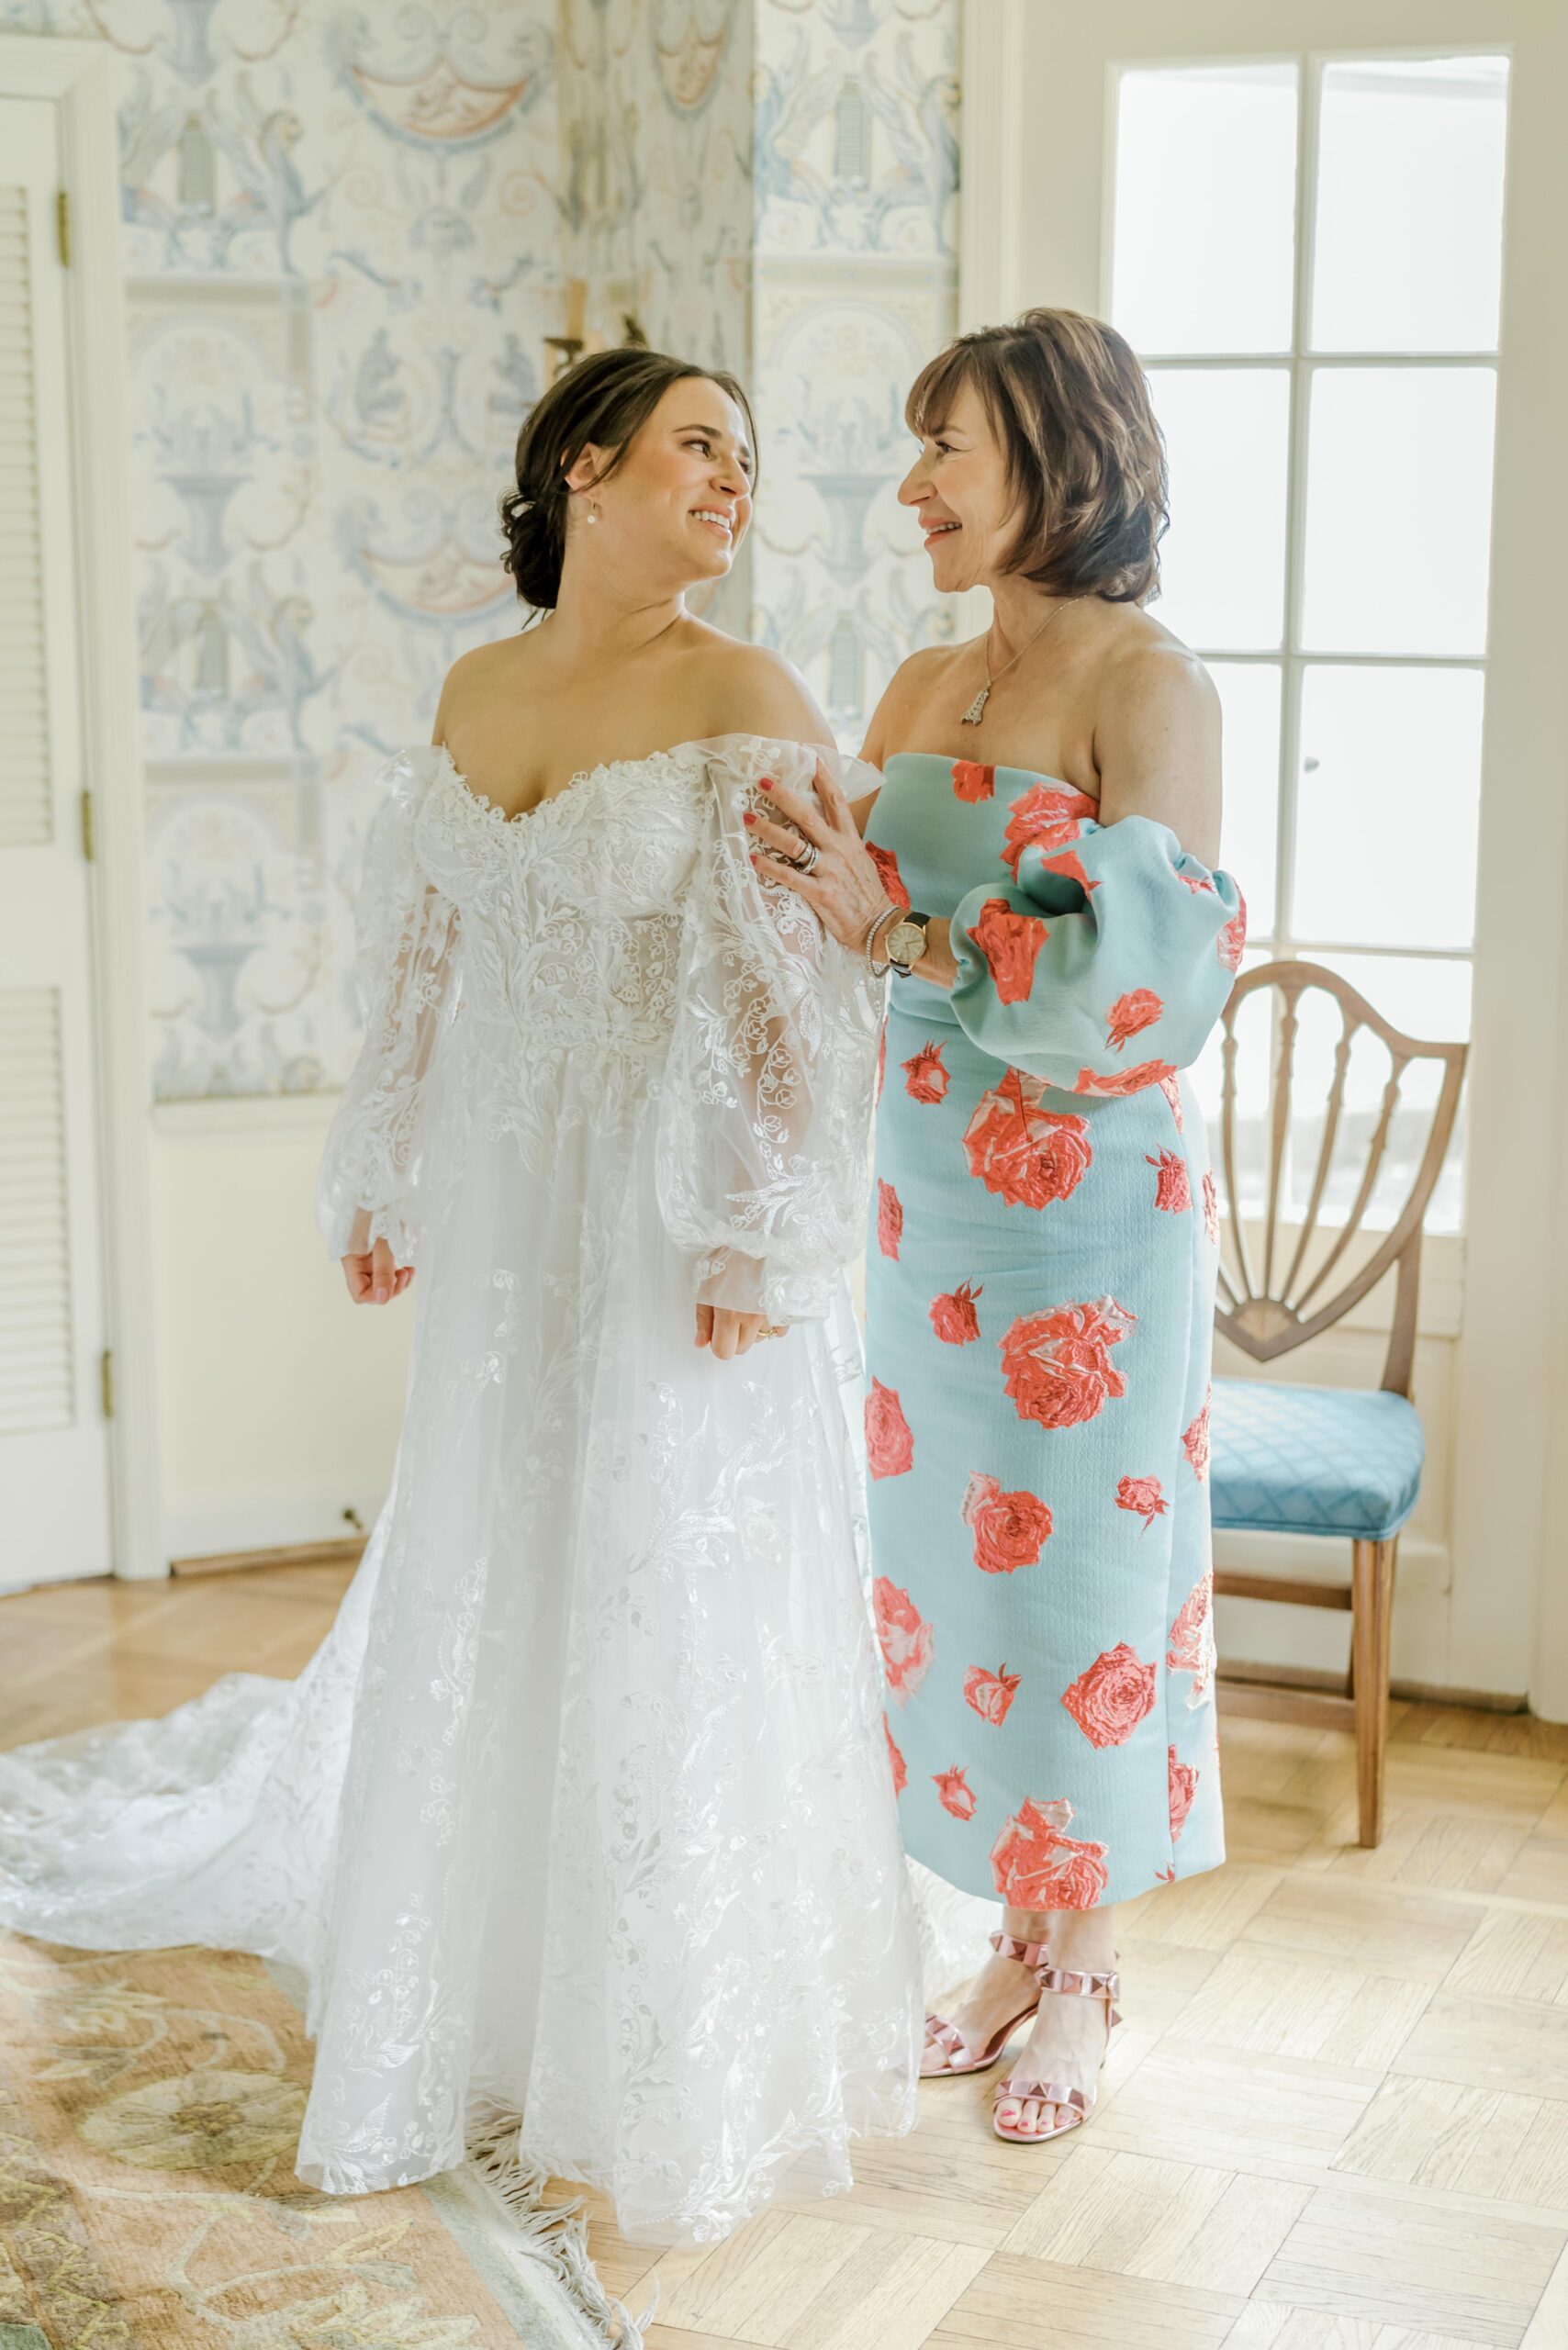 Mother of the bride helps the bride into her dress at the Pittsburgh wedding